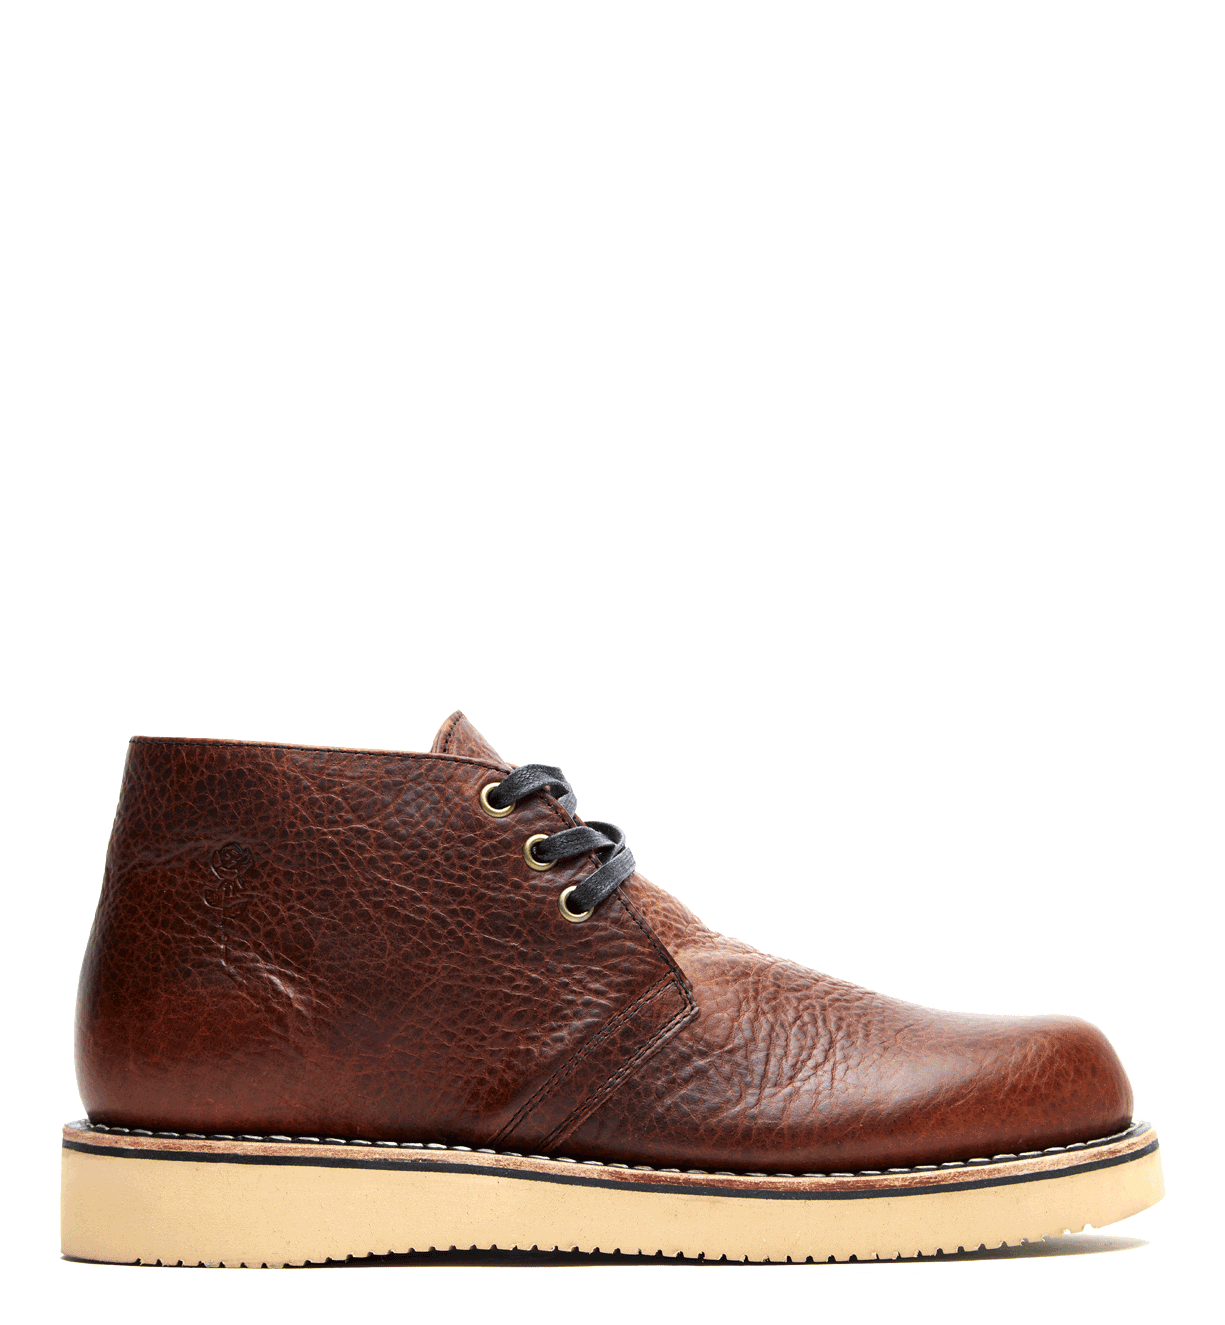 Brown leather Santa Rosa Brand Union Cognac Bison Boot with a light-colored sole, isolated on a white background.